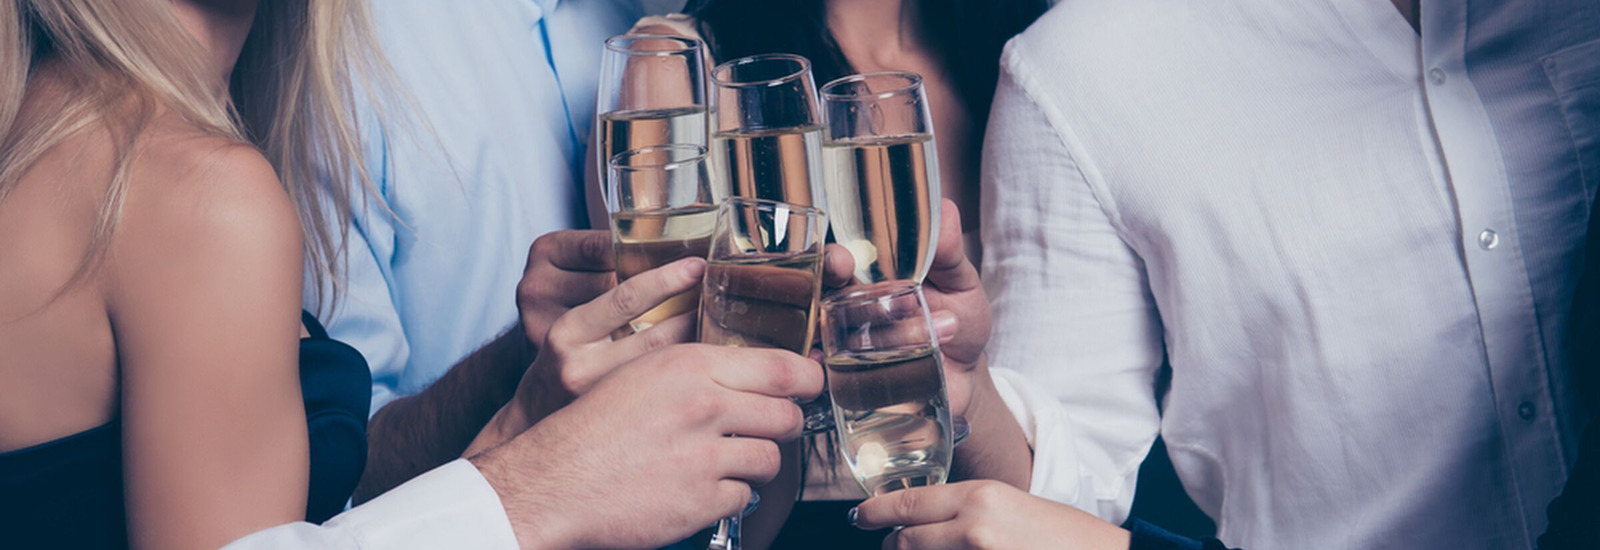 Adults toasting with champagne glasses